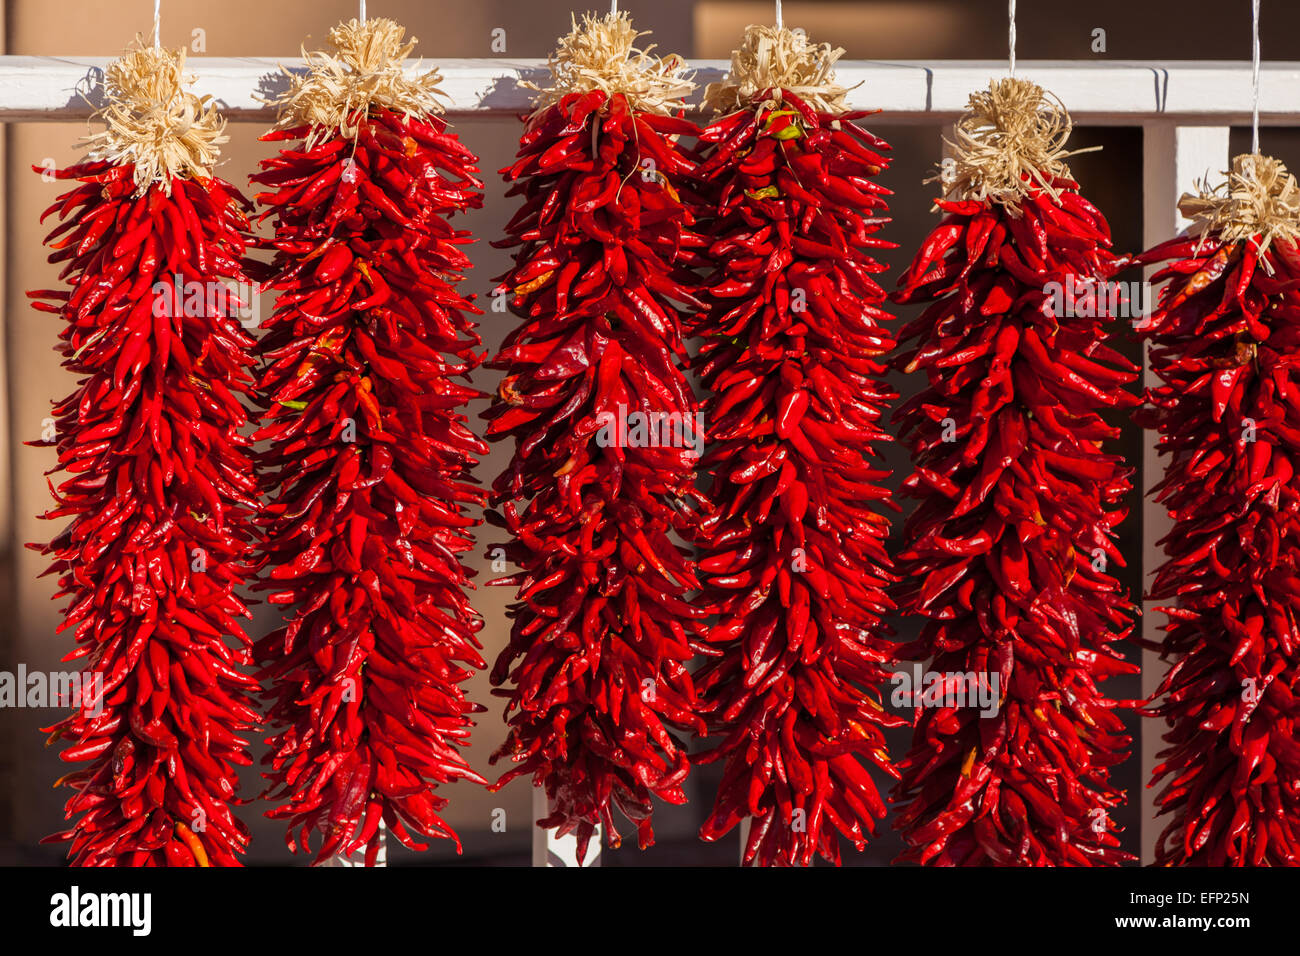 Red, ristra hanging chili peppers as a background Stock Photo